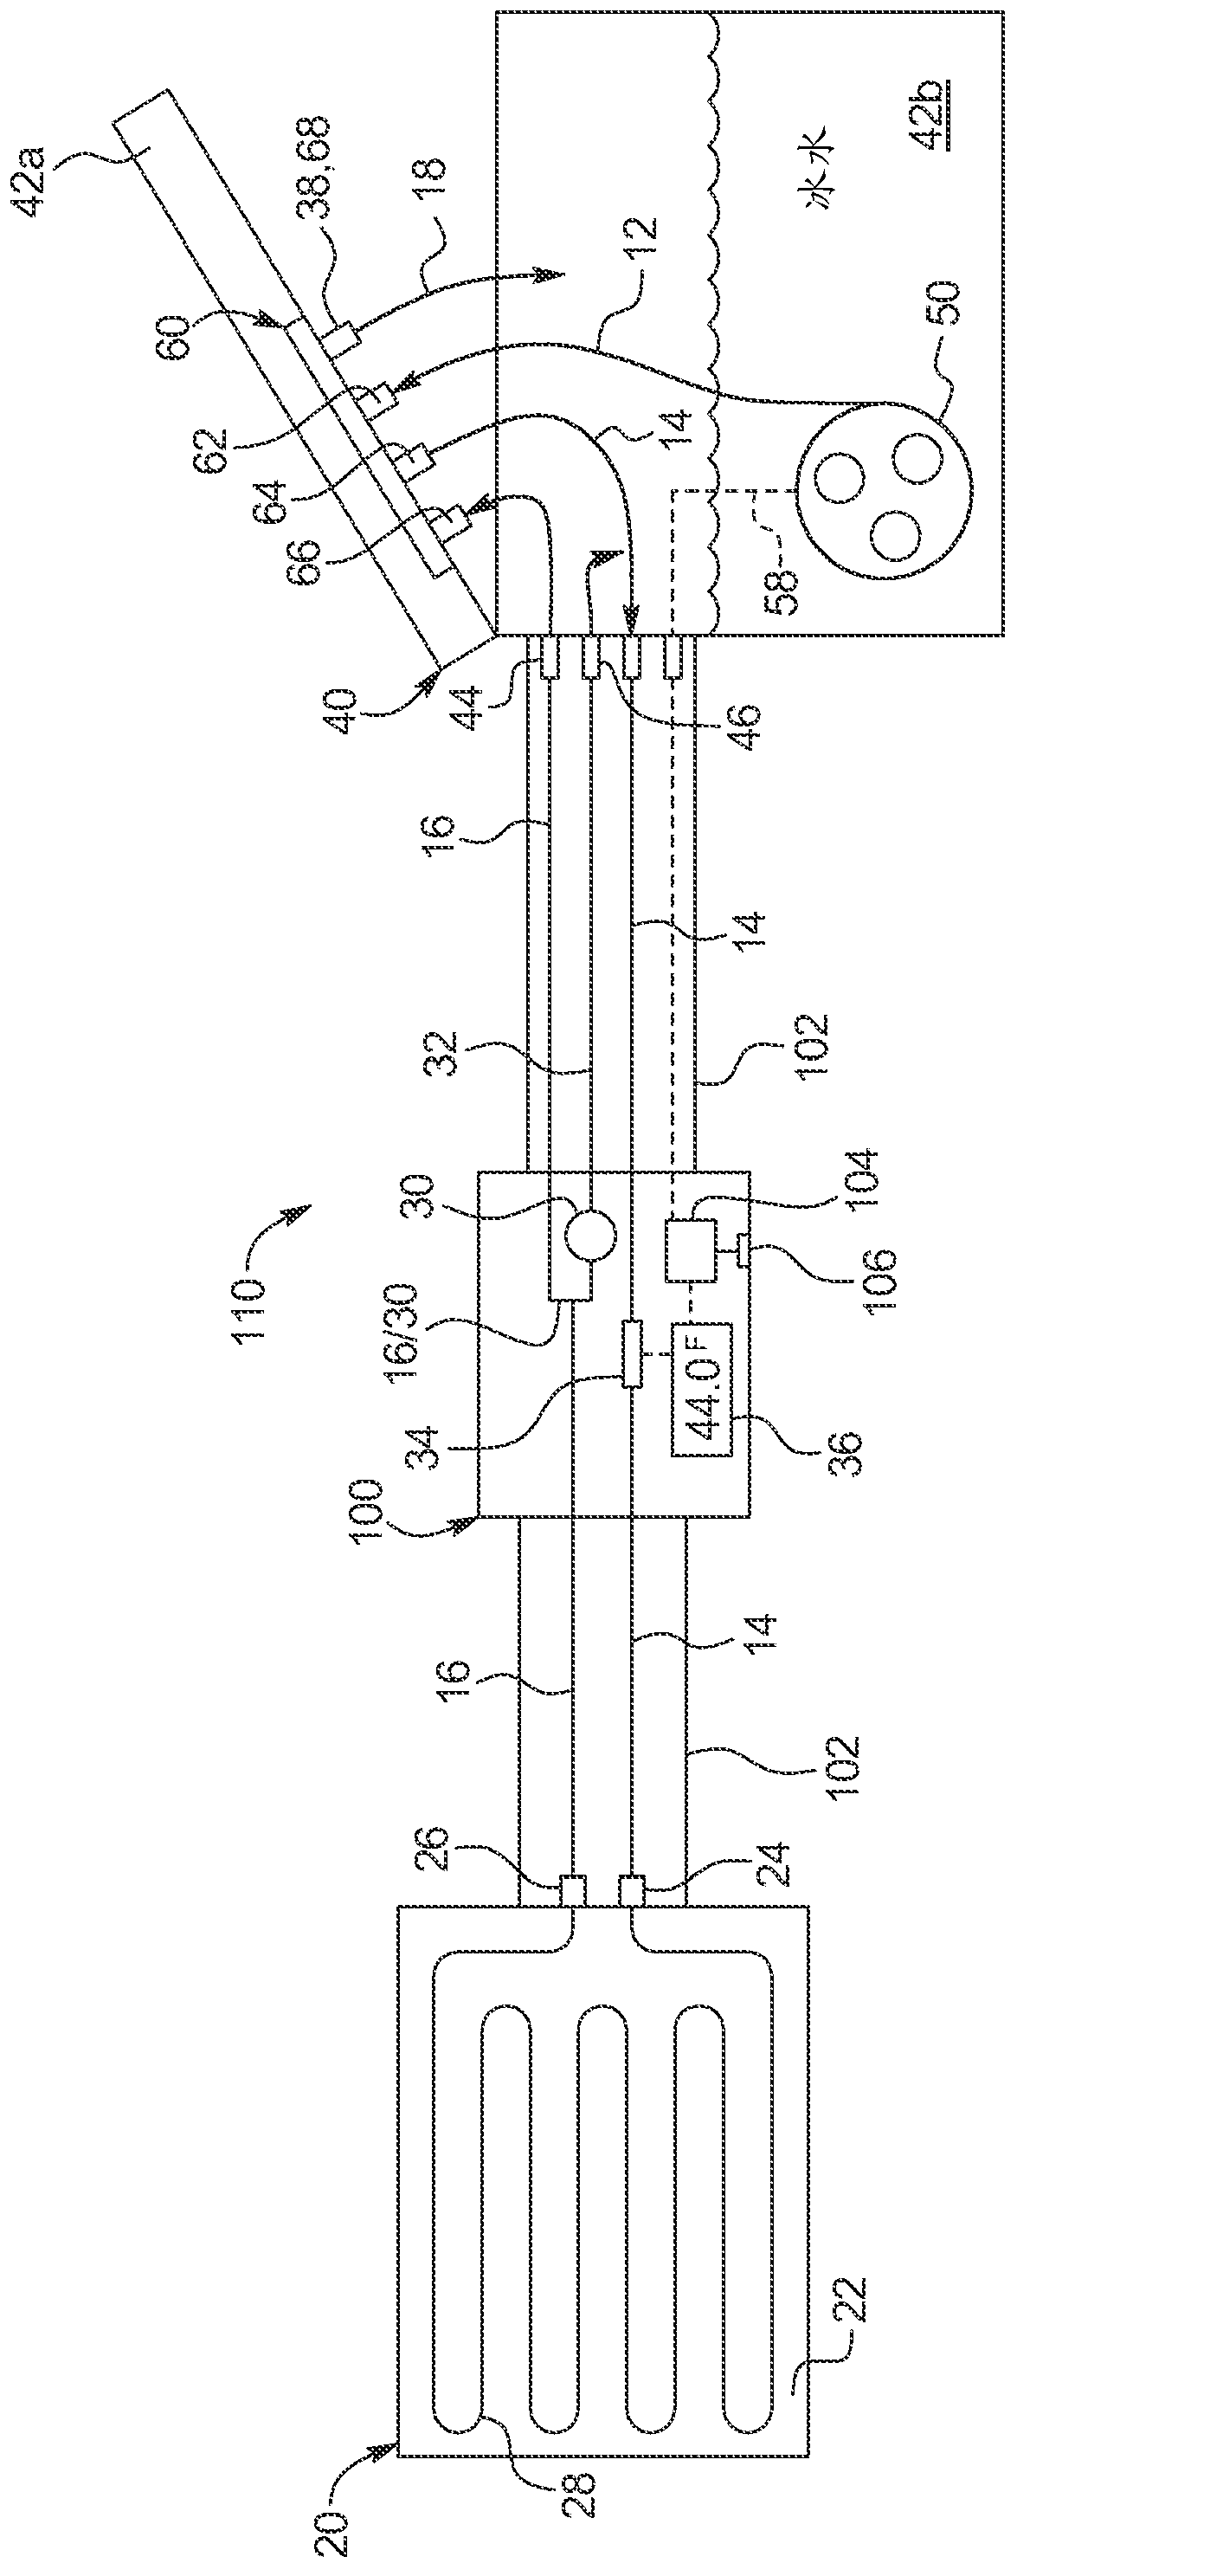 Cold therapy apparatus using heat exchanger